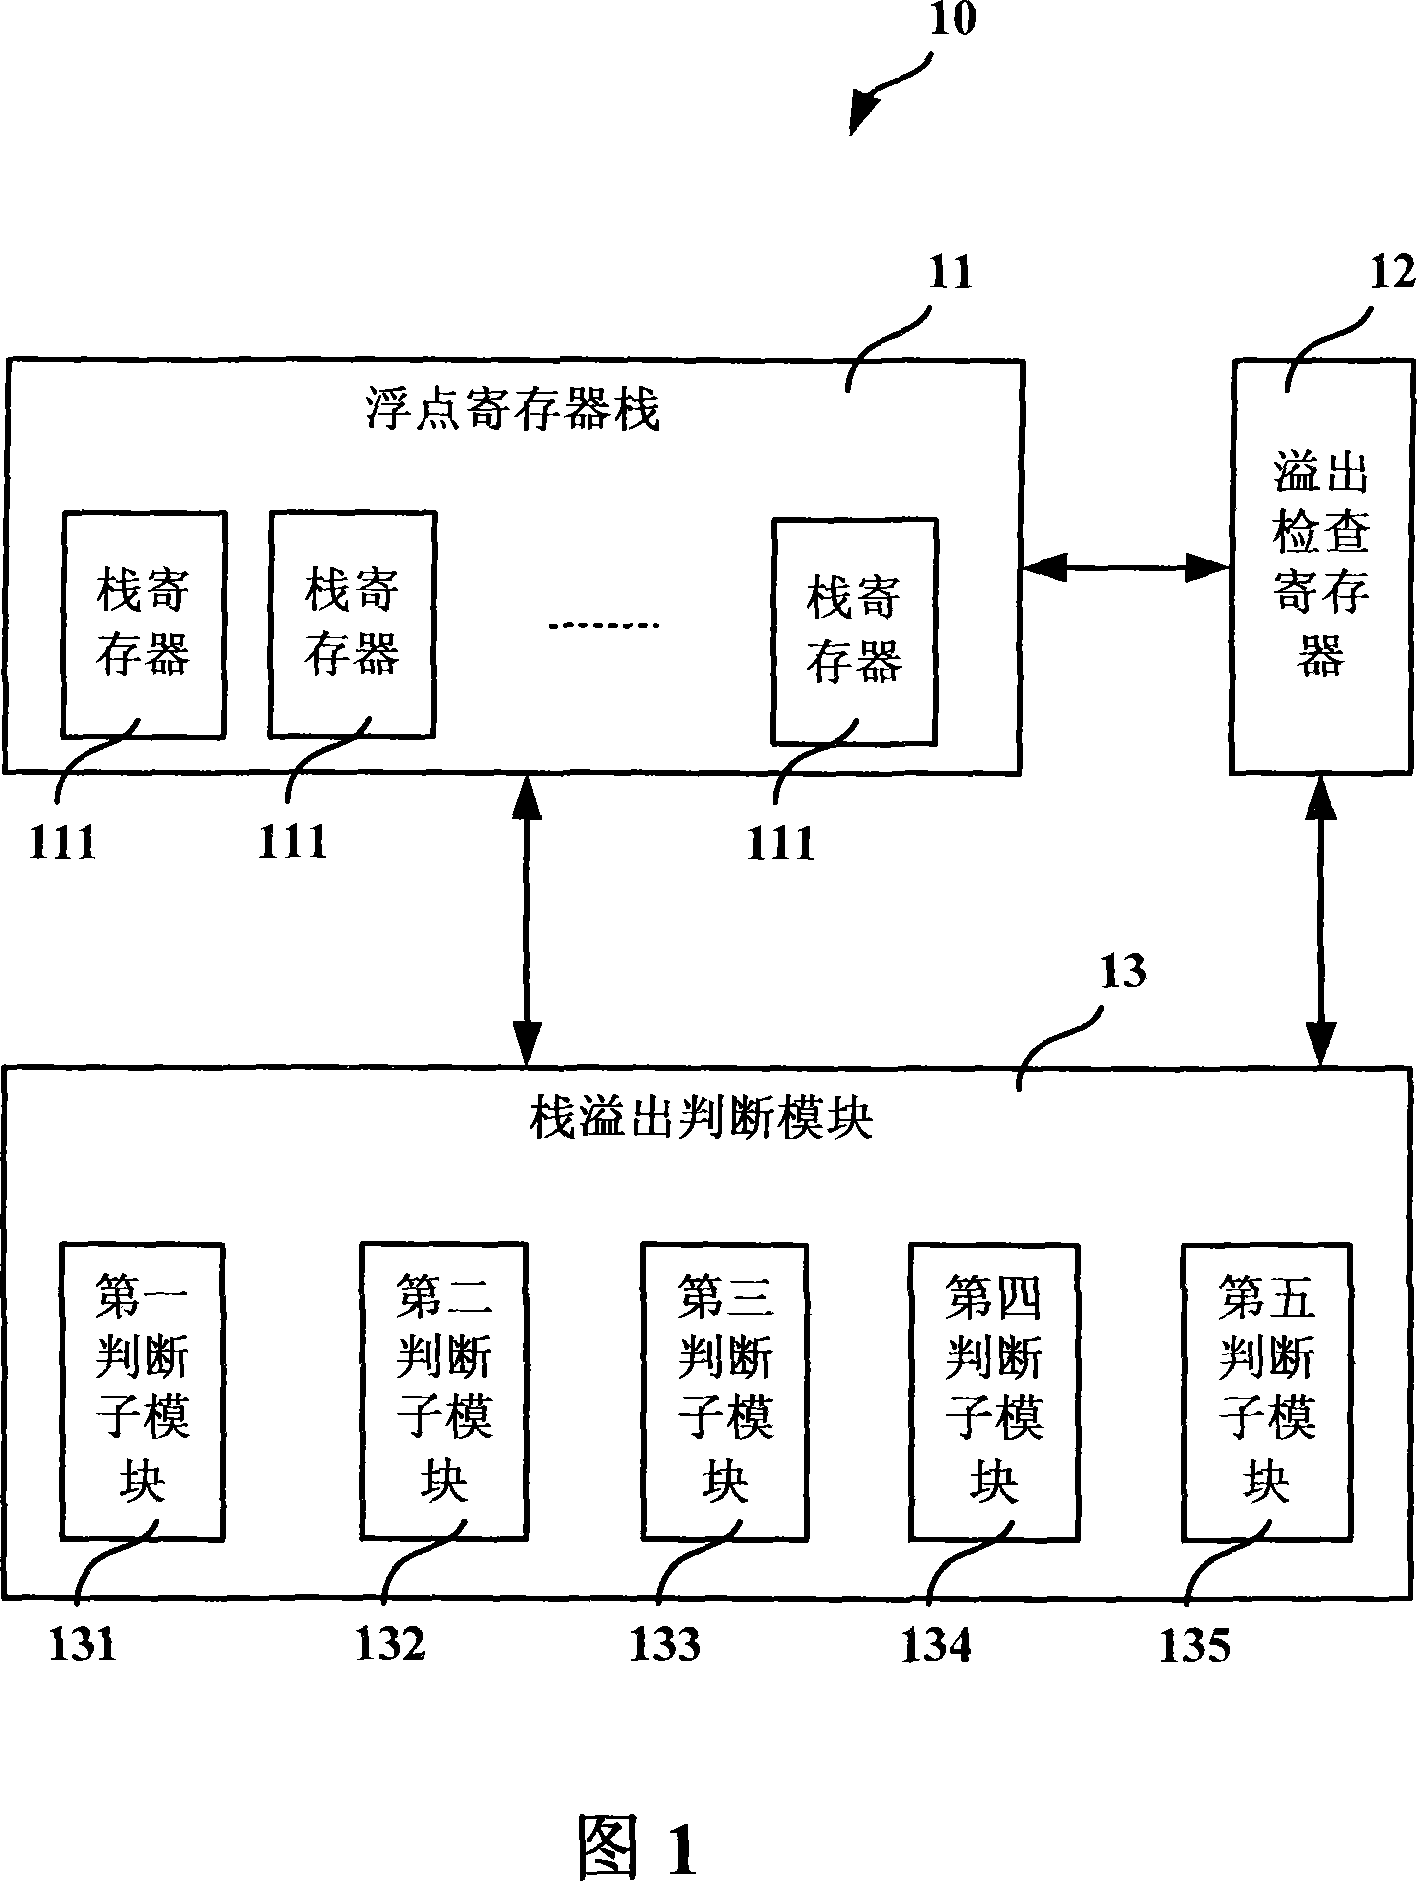 Apparatus and method for checking floating point stack overflow on non-CISC processor